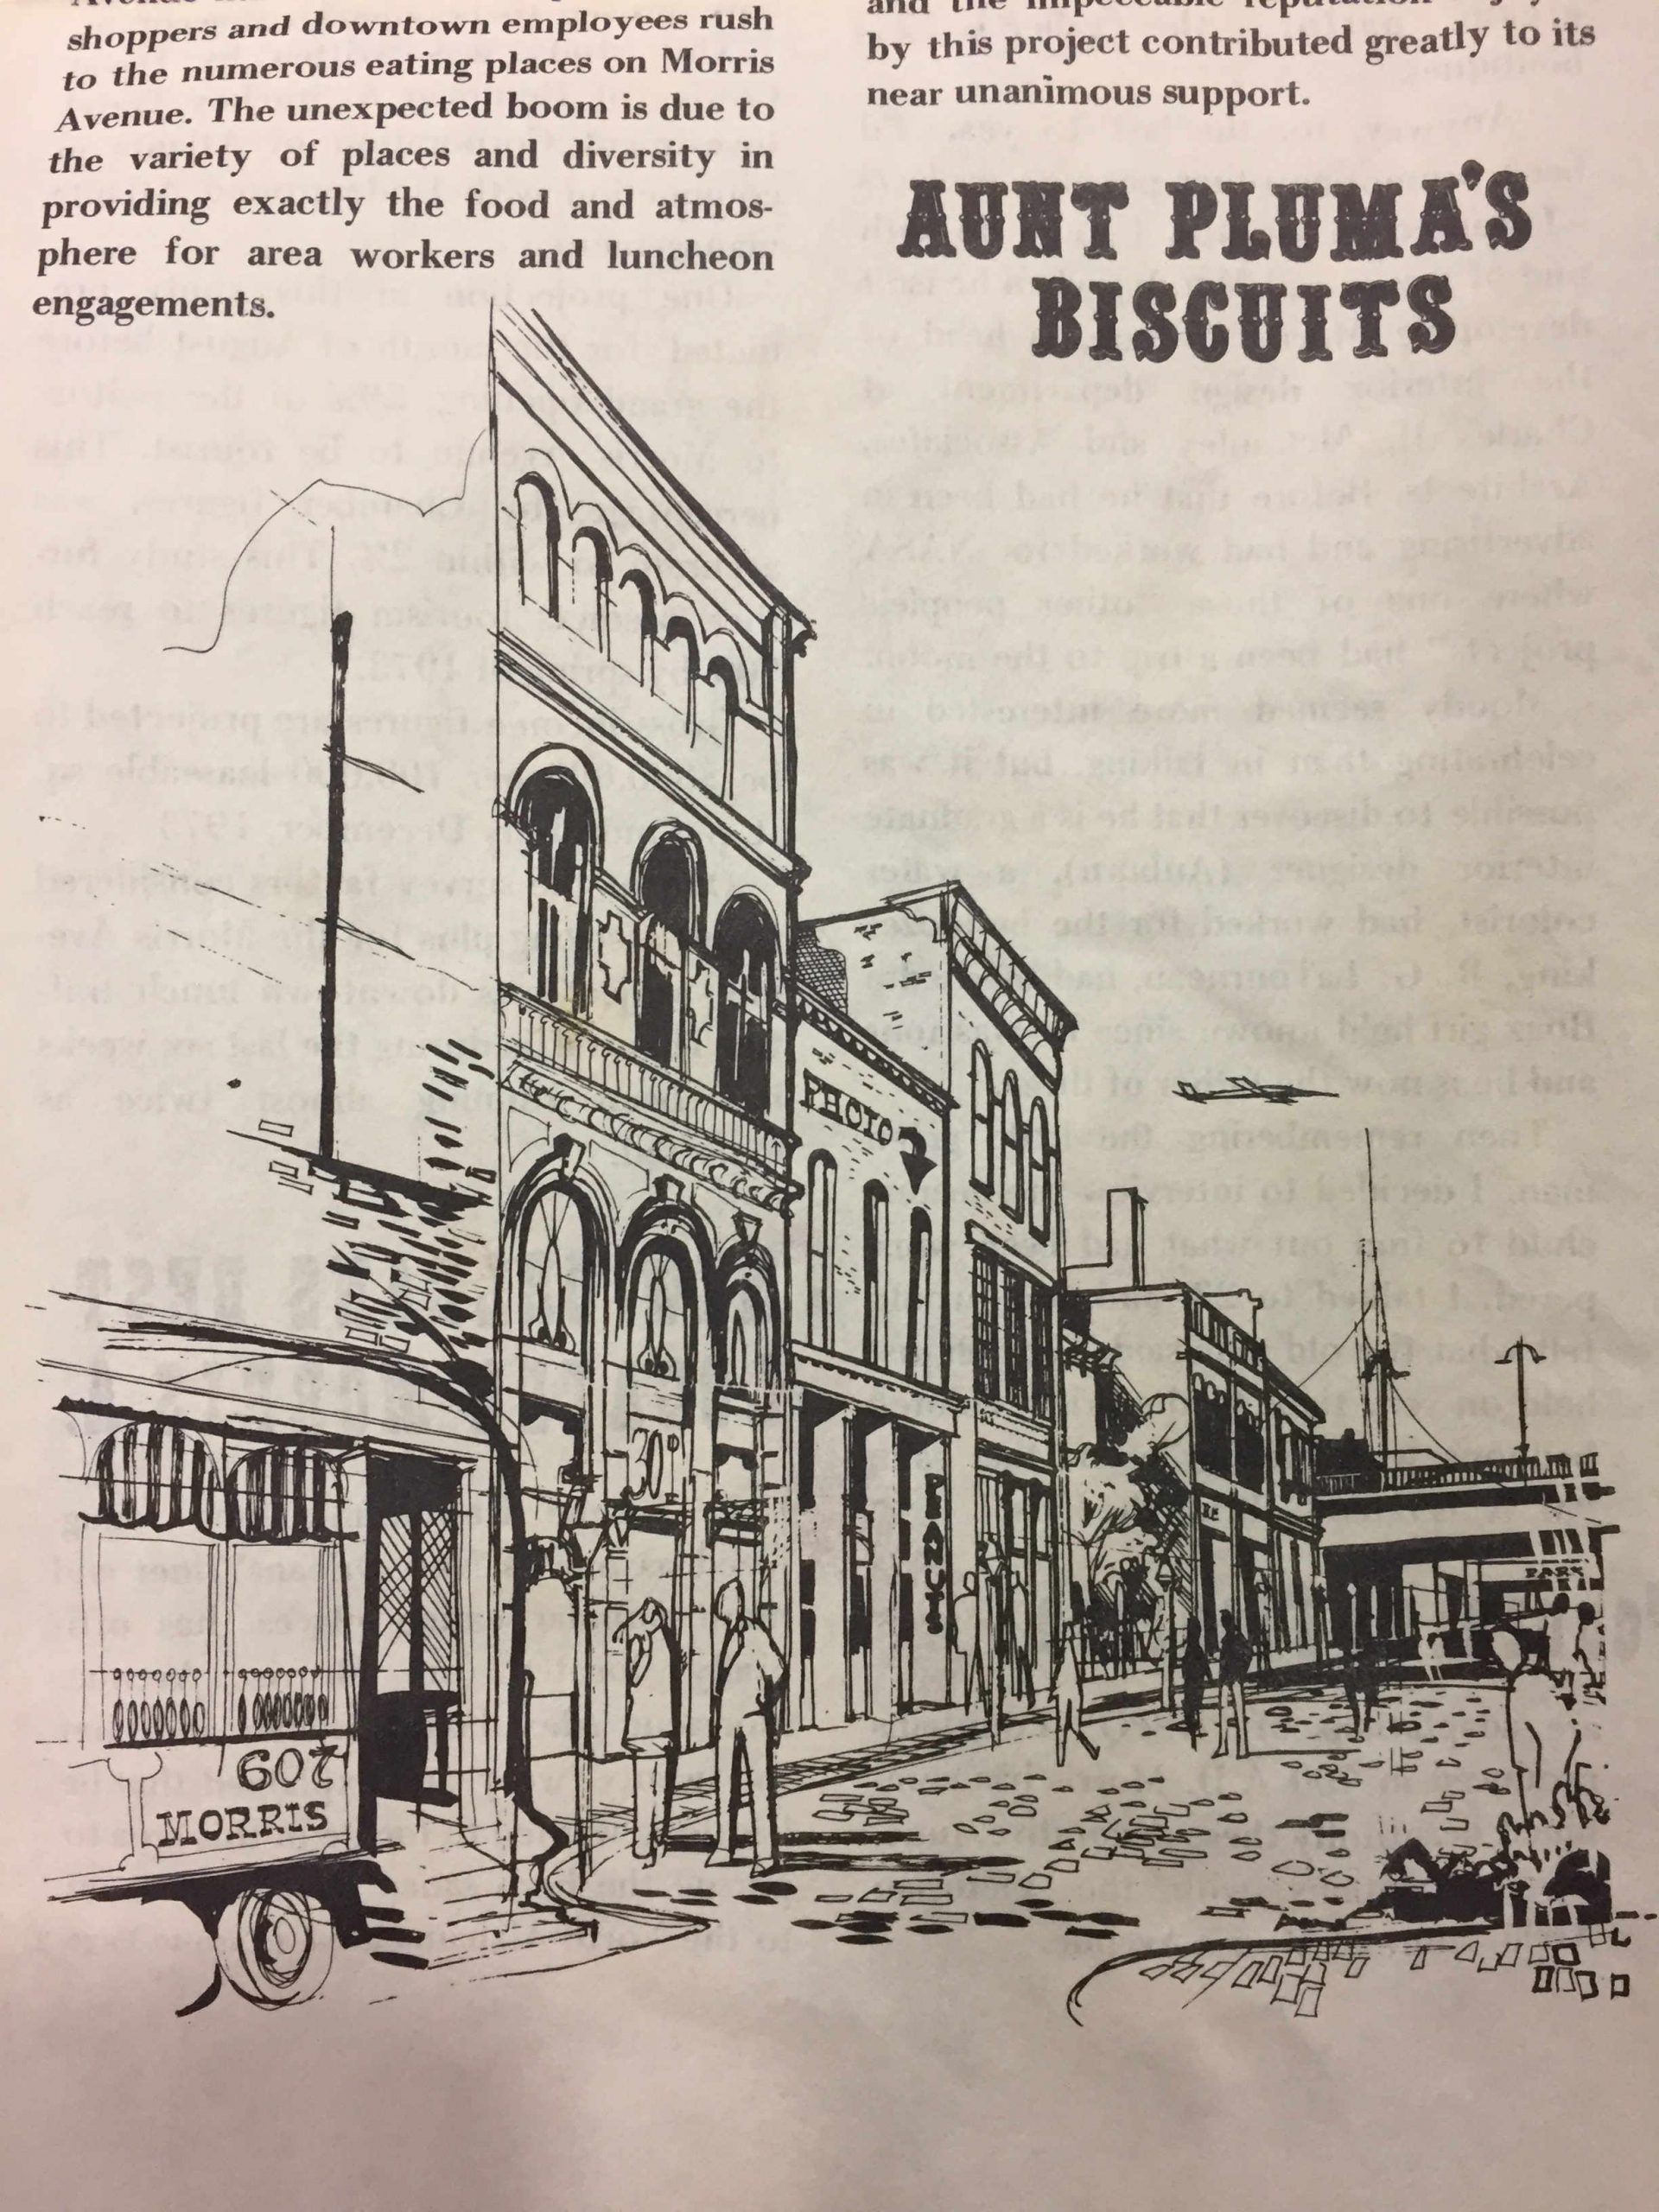 Photo of an old newspaper ad for aunt Pluma's biscuits using Morris Avenue, and Kinetic's current building, as a backdrop.